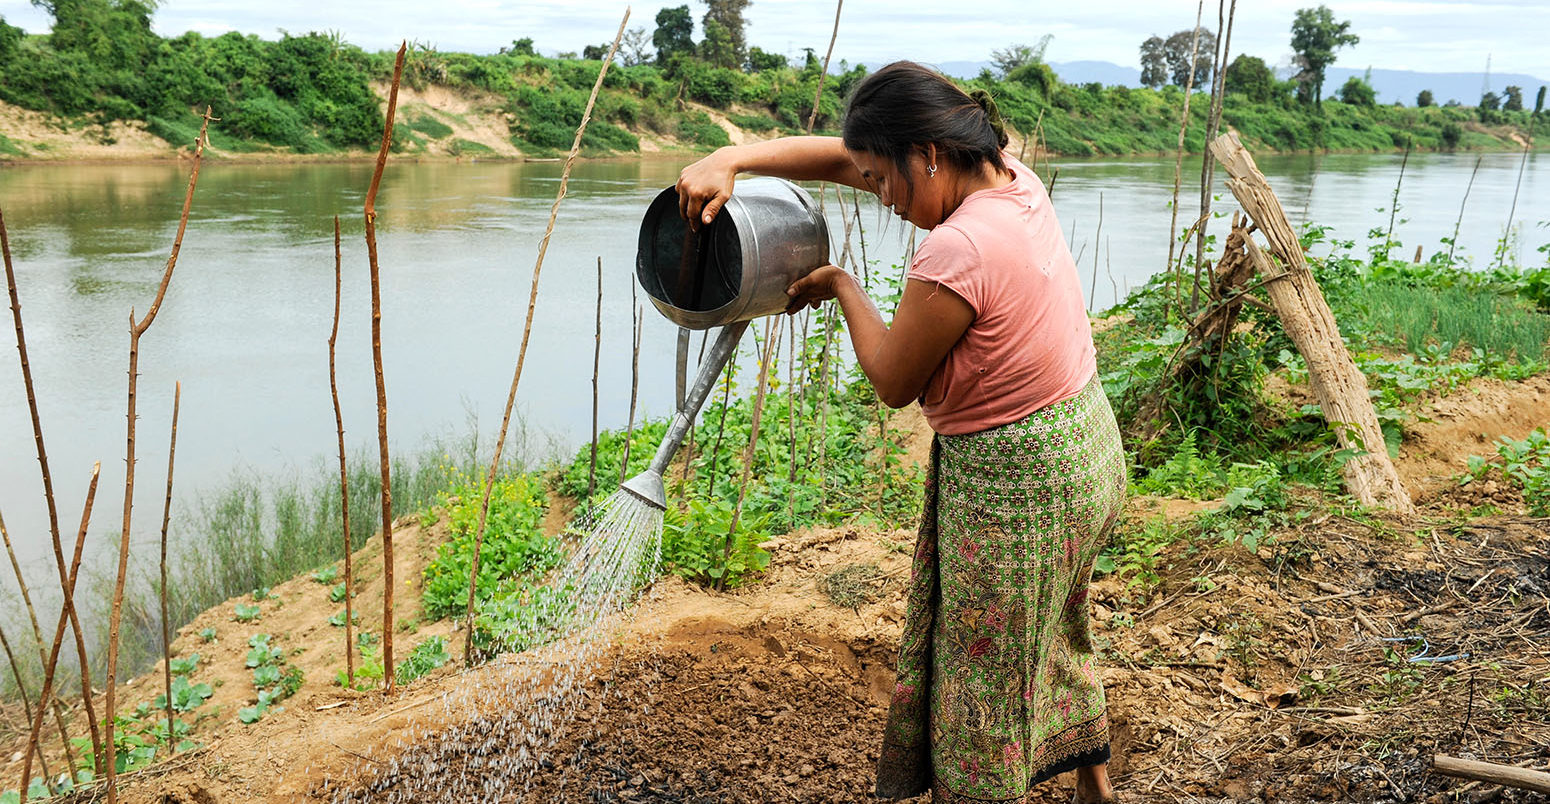 A woman waters her crops near a river in Vientiane, Laos. Credit: Joerg Boethling / Alamy Stock Photo. W18X5B